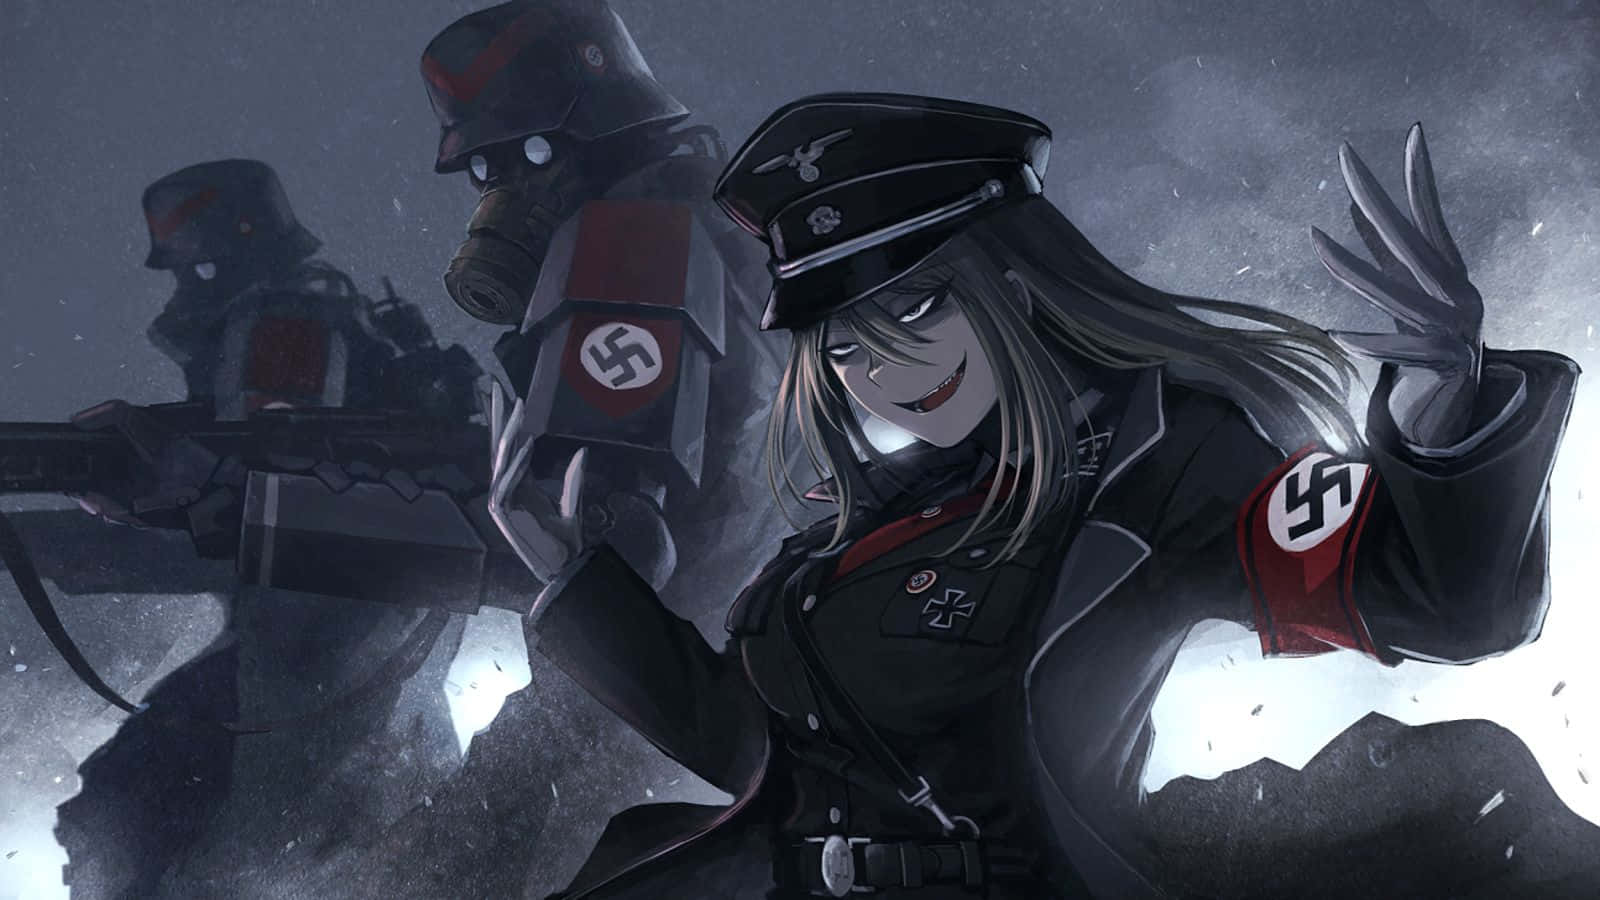 Anime Soldier Edgy PFP Wallpaper